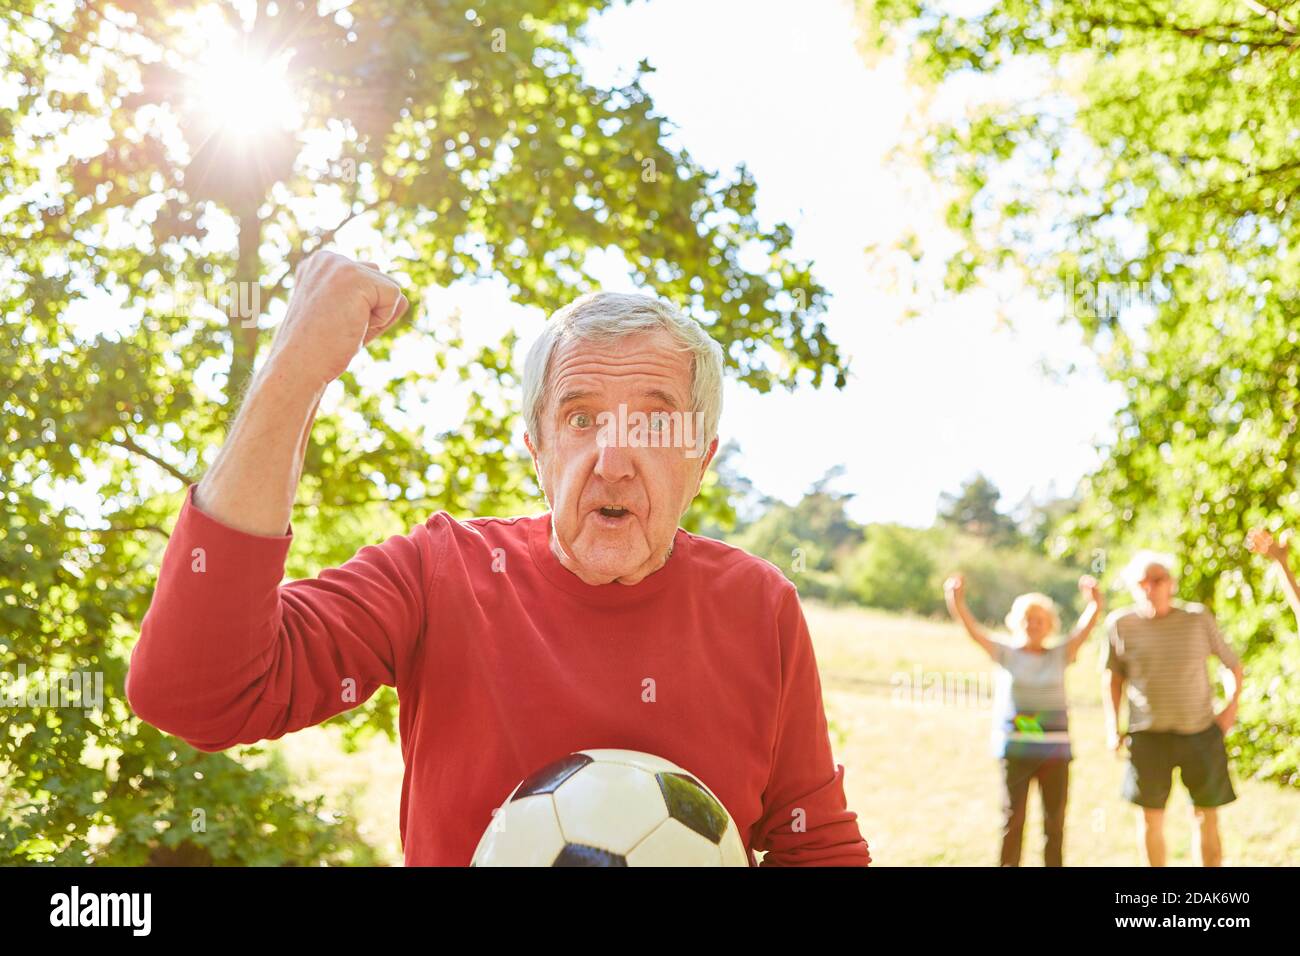 Senior as pensioner with soccer ball cheers with clenched fist after a soccer game Stock Photo